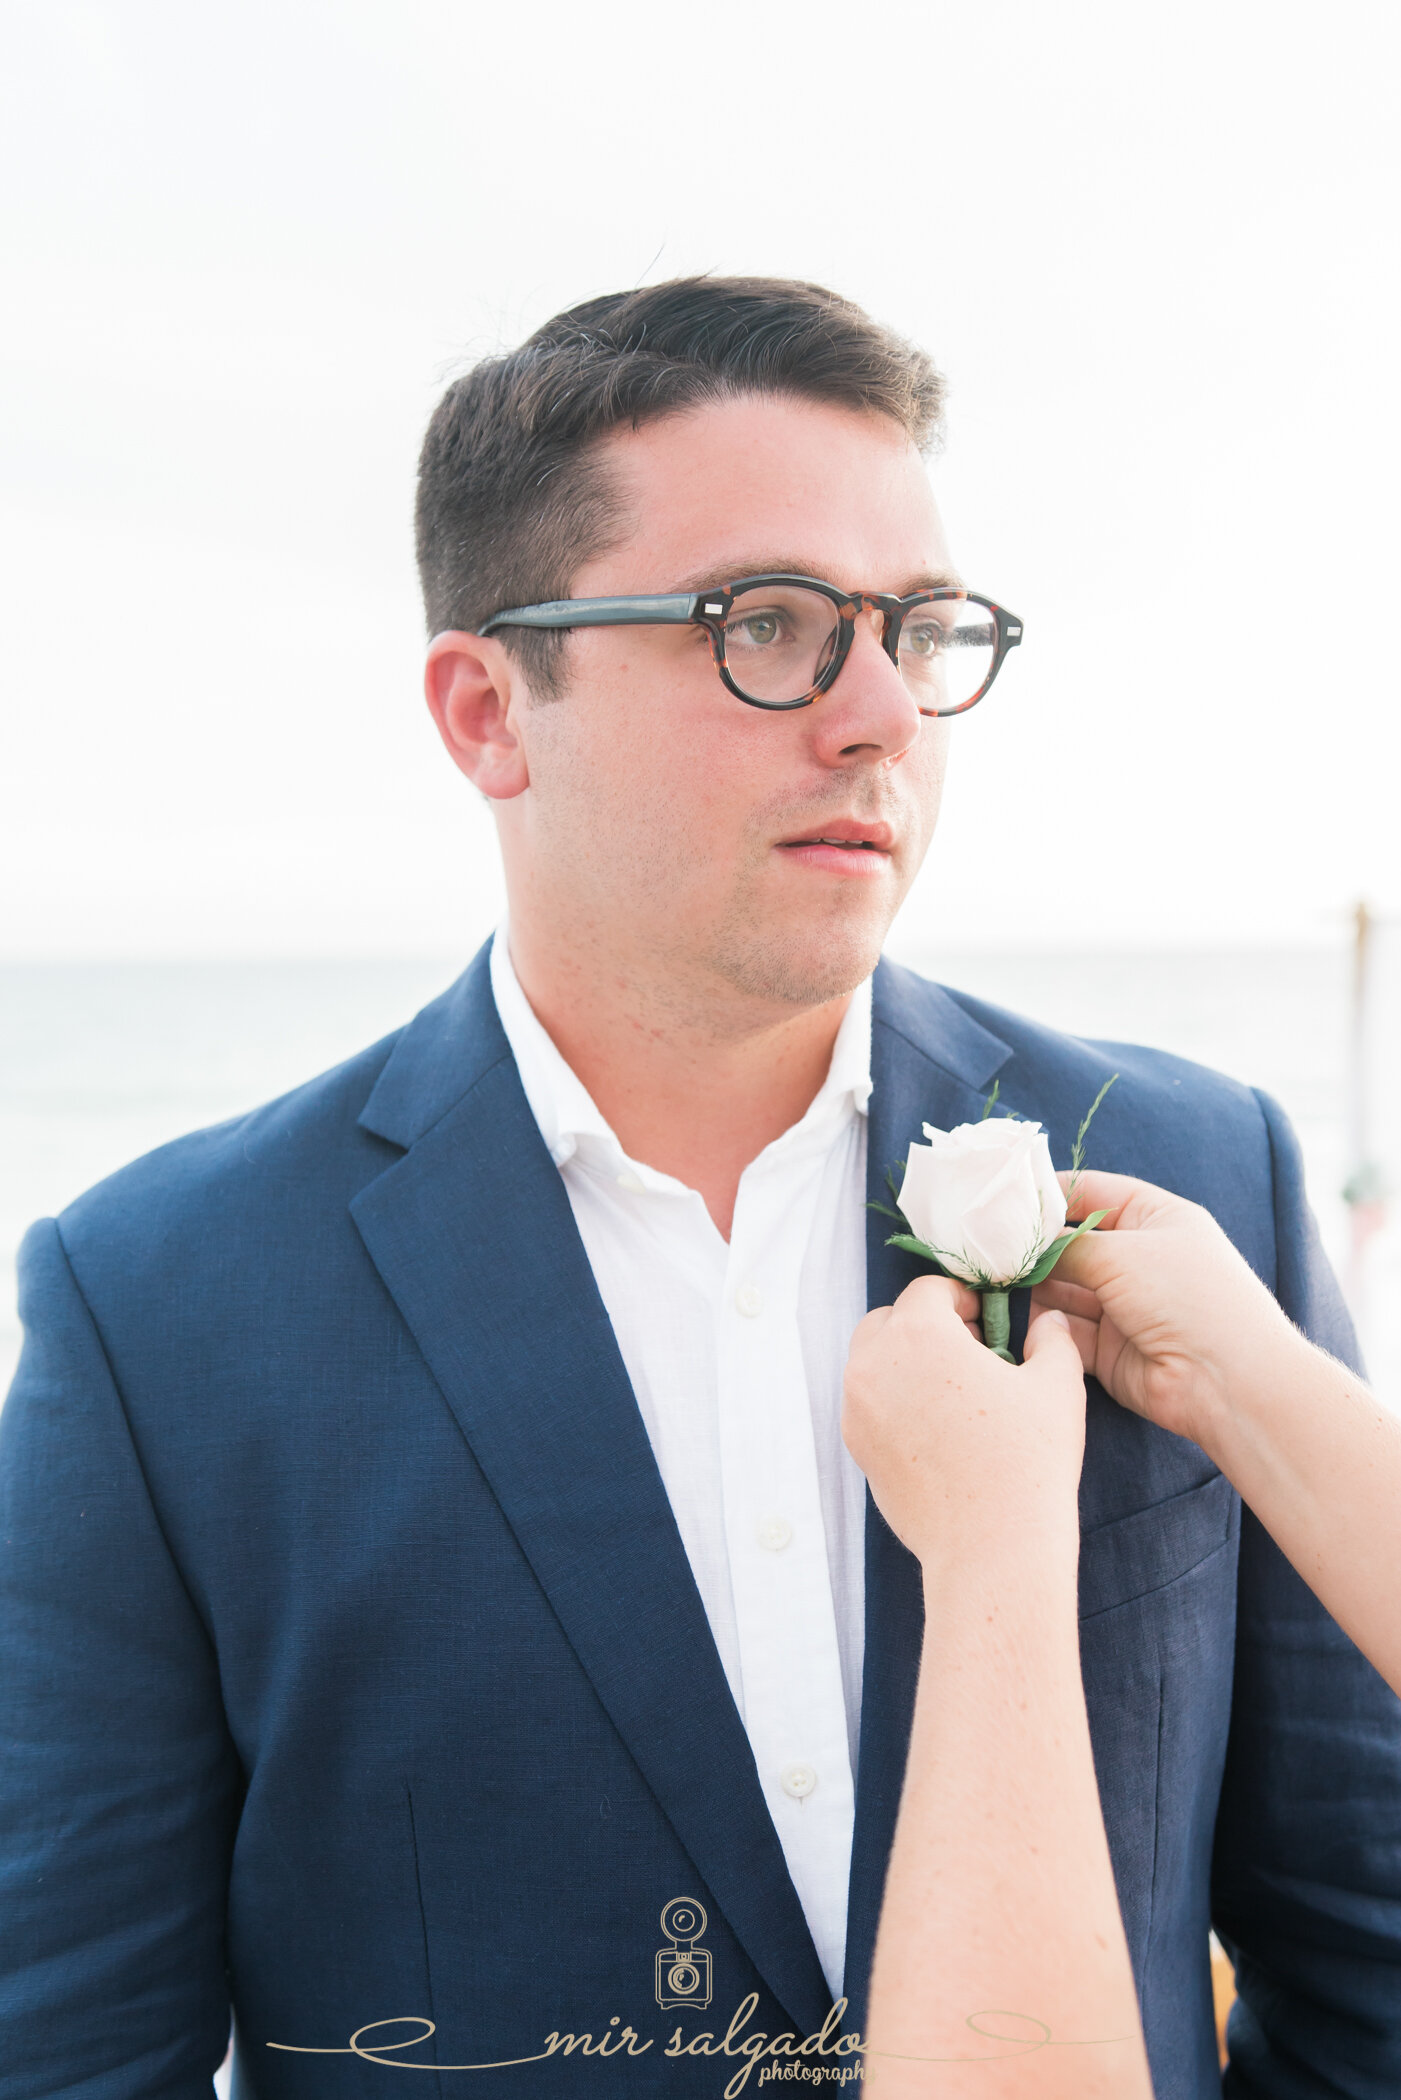 groom-attire, groom-outfit, groom-boutonnière, groom-getting-ready-for-wedding